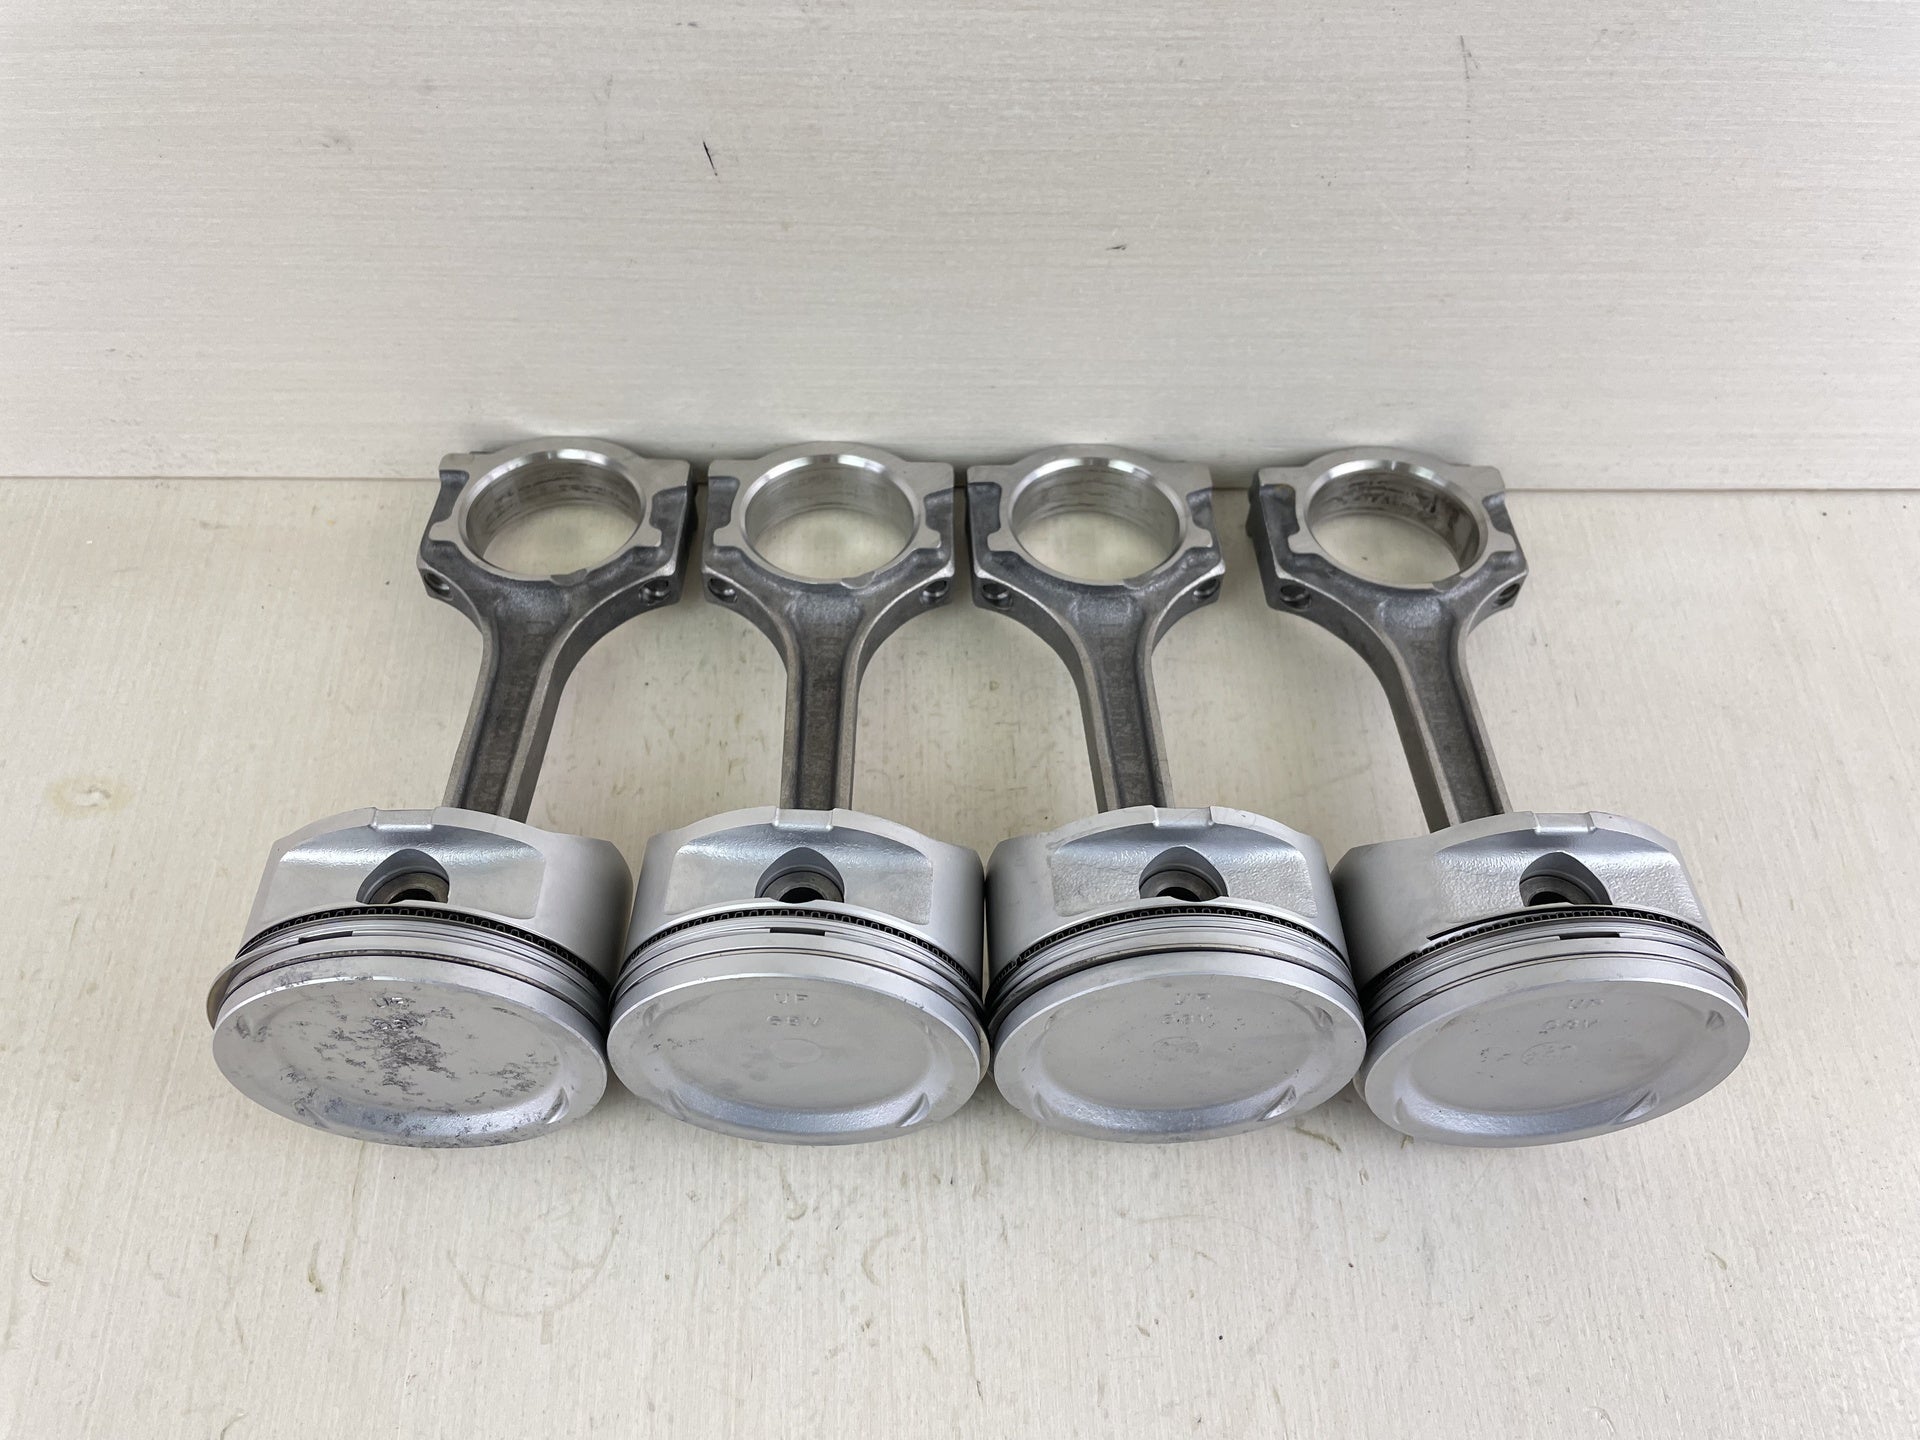 03-04 Yamaha 75 90 HP 4 Stroke Outboard Piston & Connecting Rod Set 60C-W1164-00-00